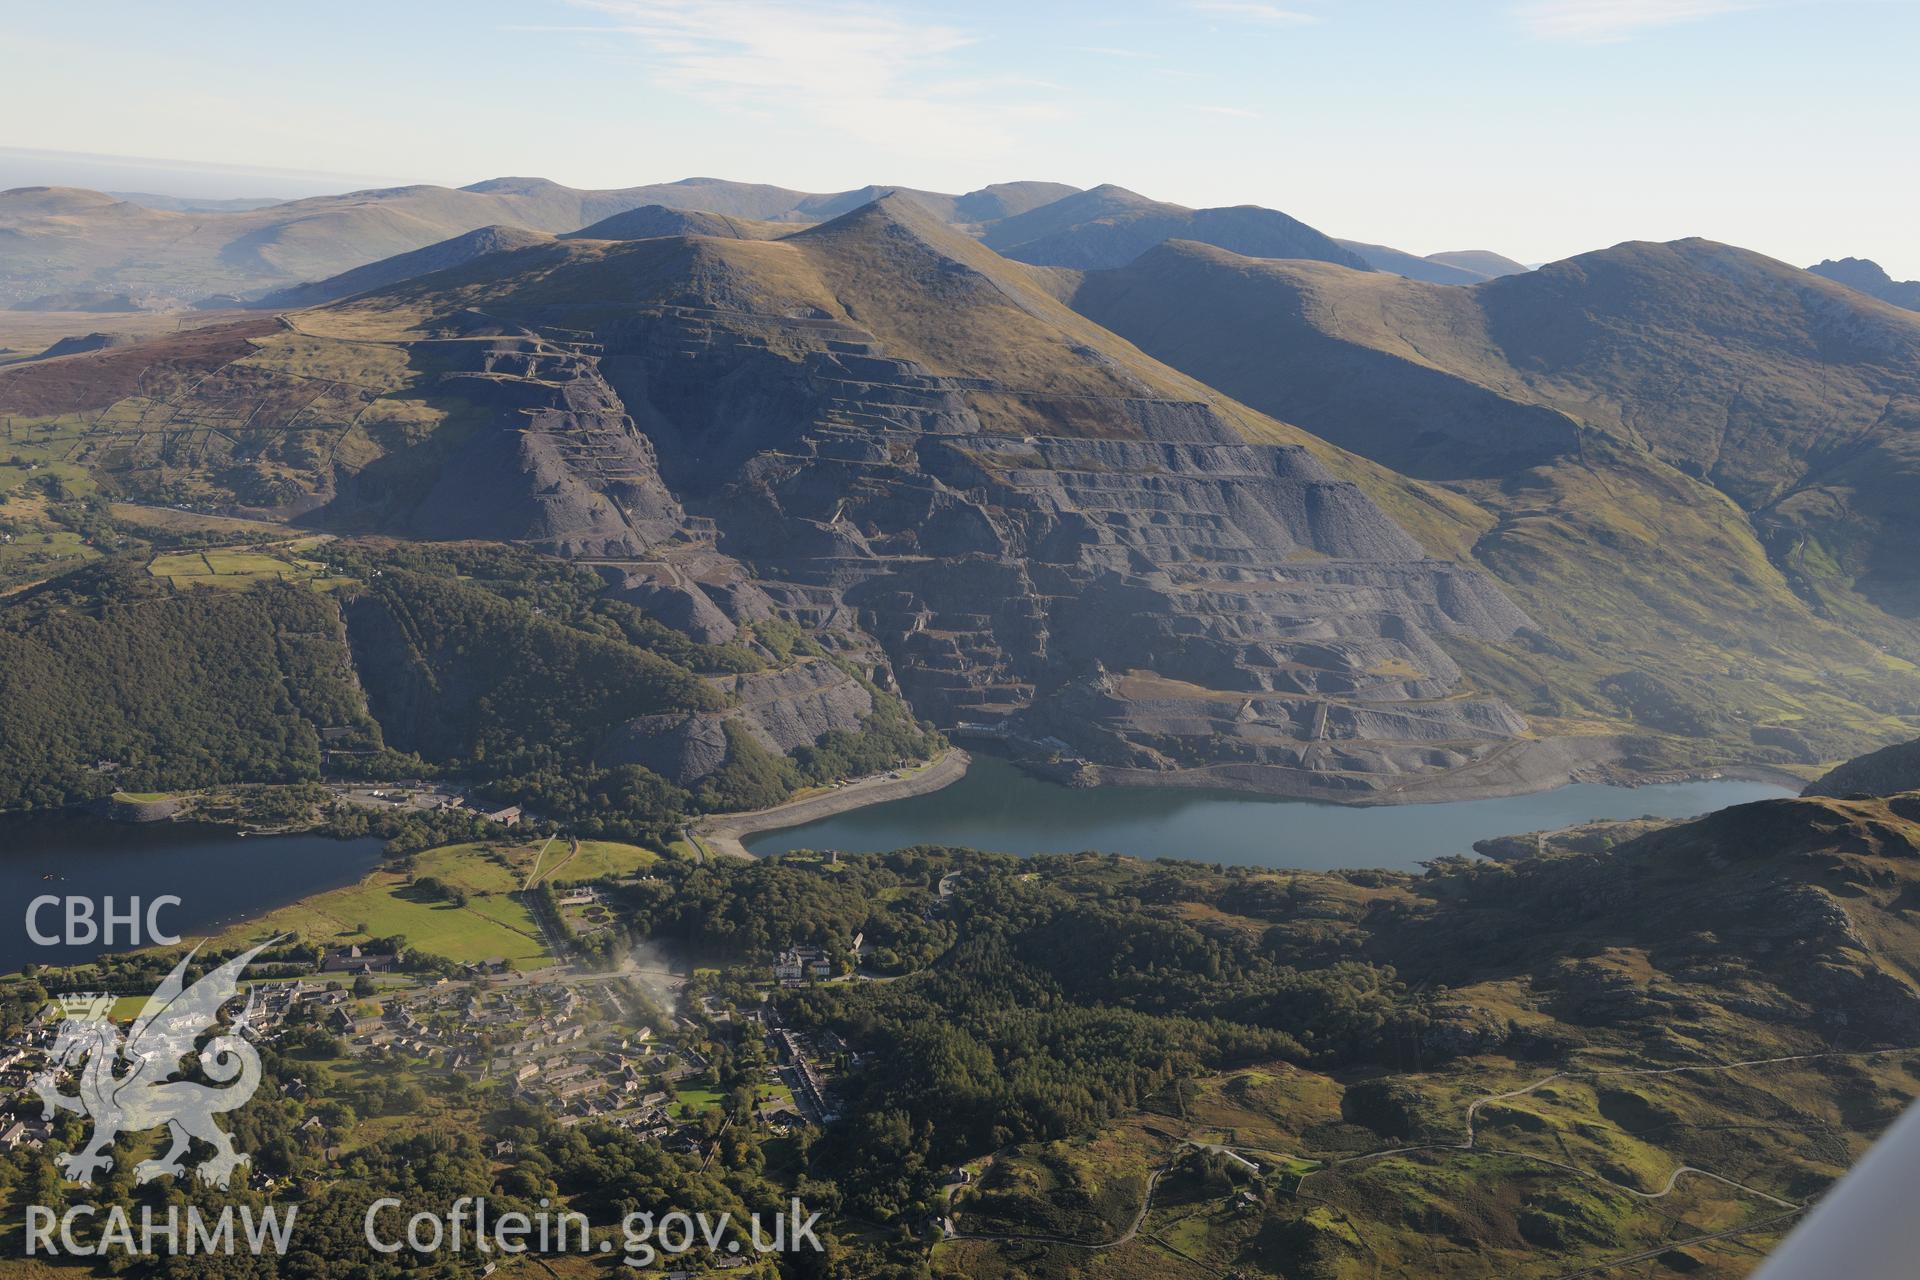 Dinorwic slate quarry and the town of Llanberis. Oblique aerial photograph taken during the Royal Commission's programme of archaeological aerial reconnaissance by Toby Driver on 2nd October 2015.